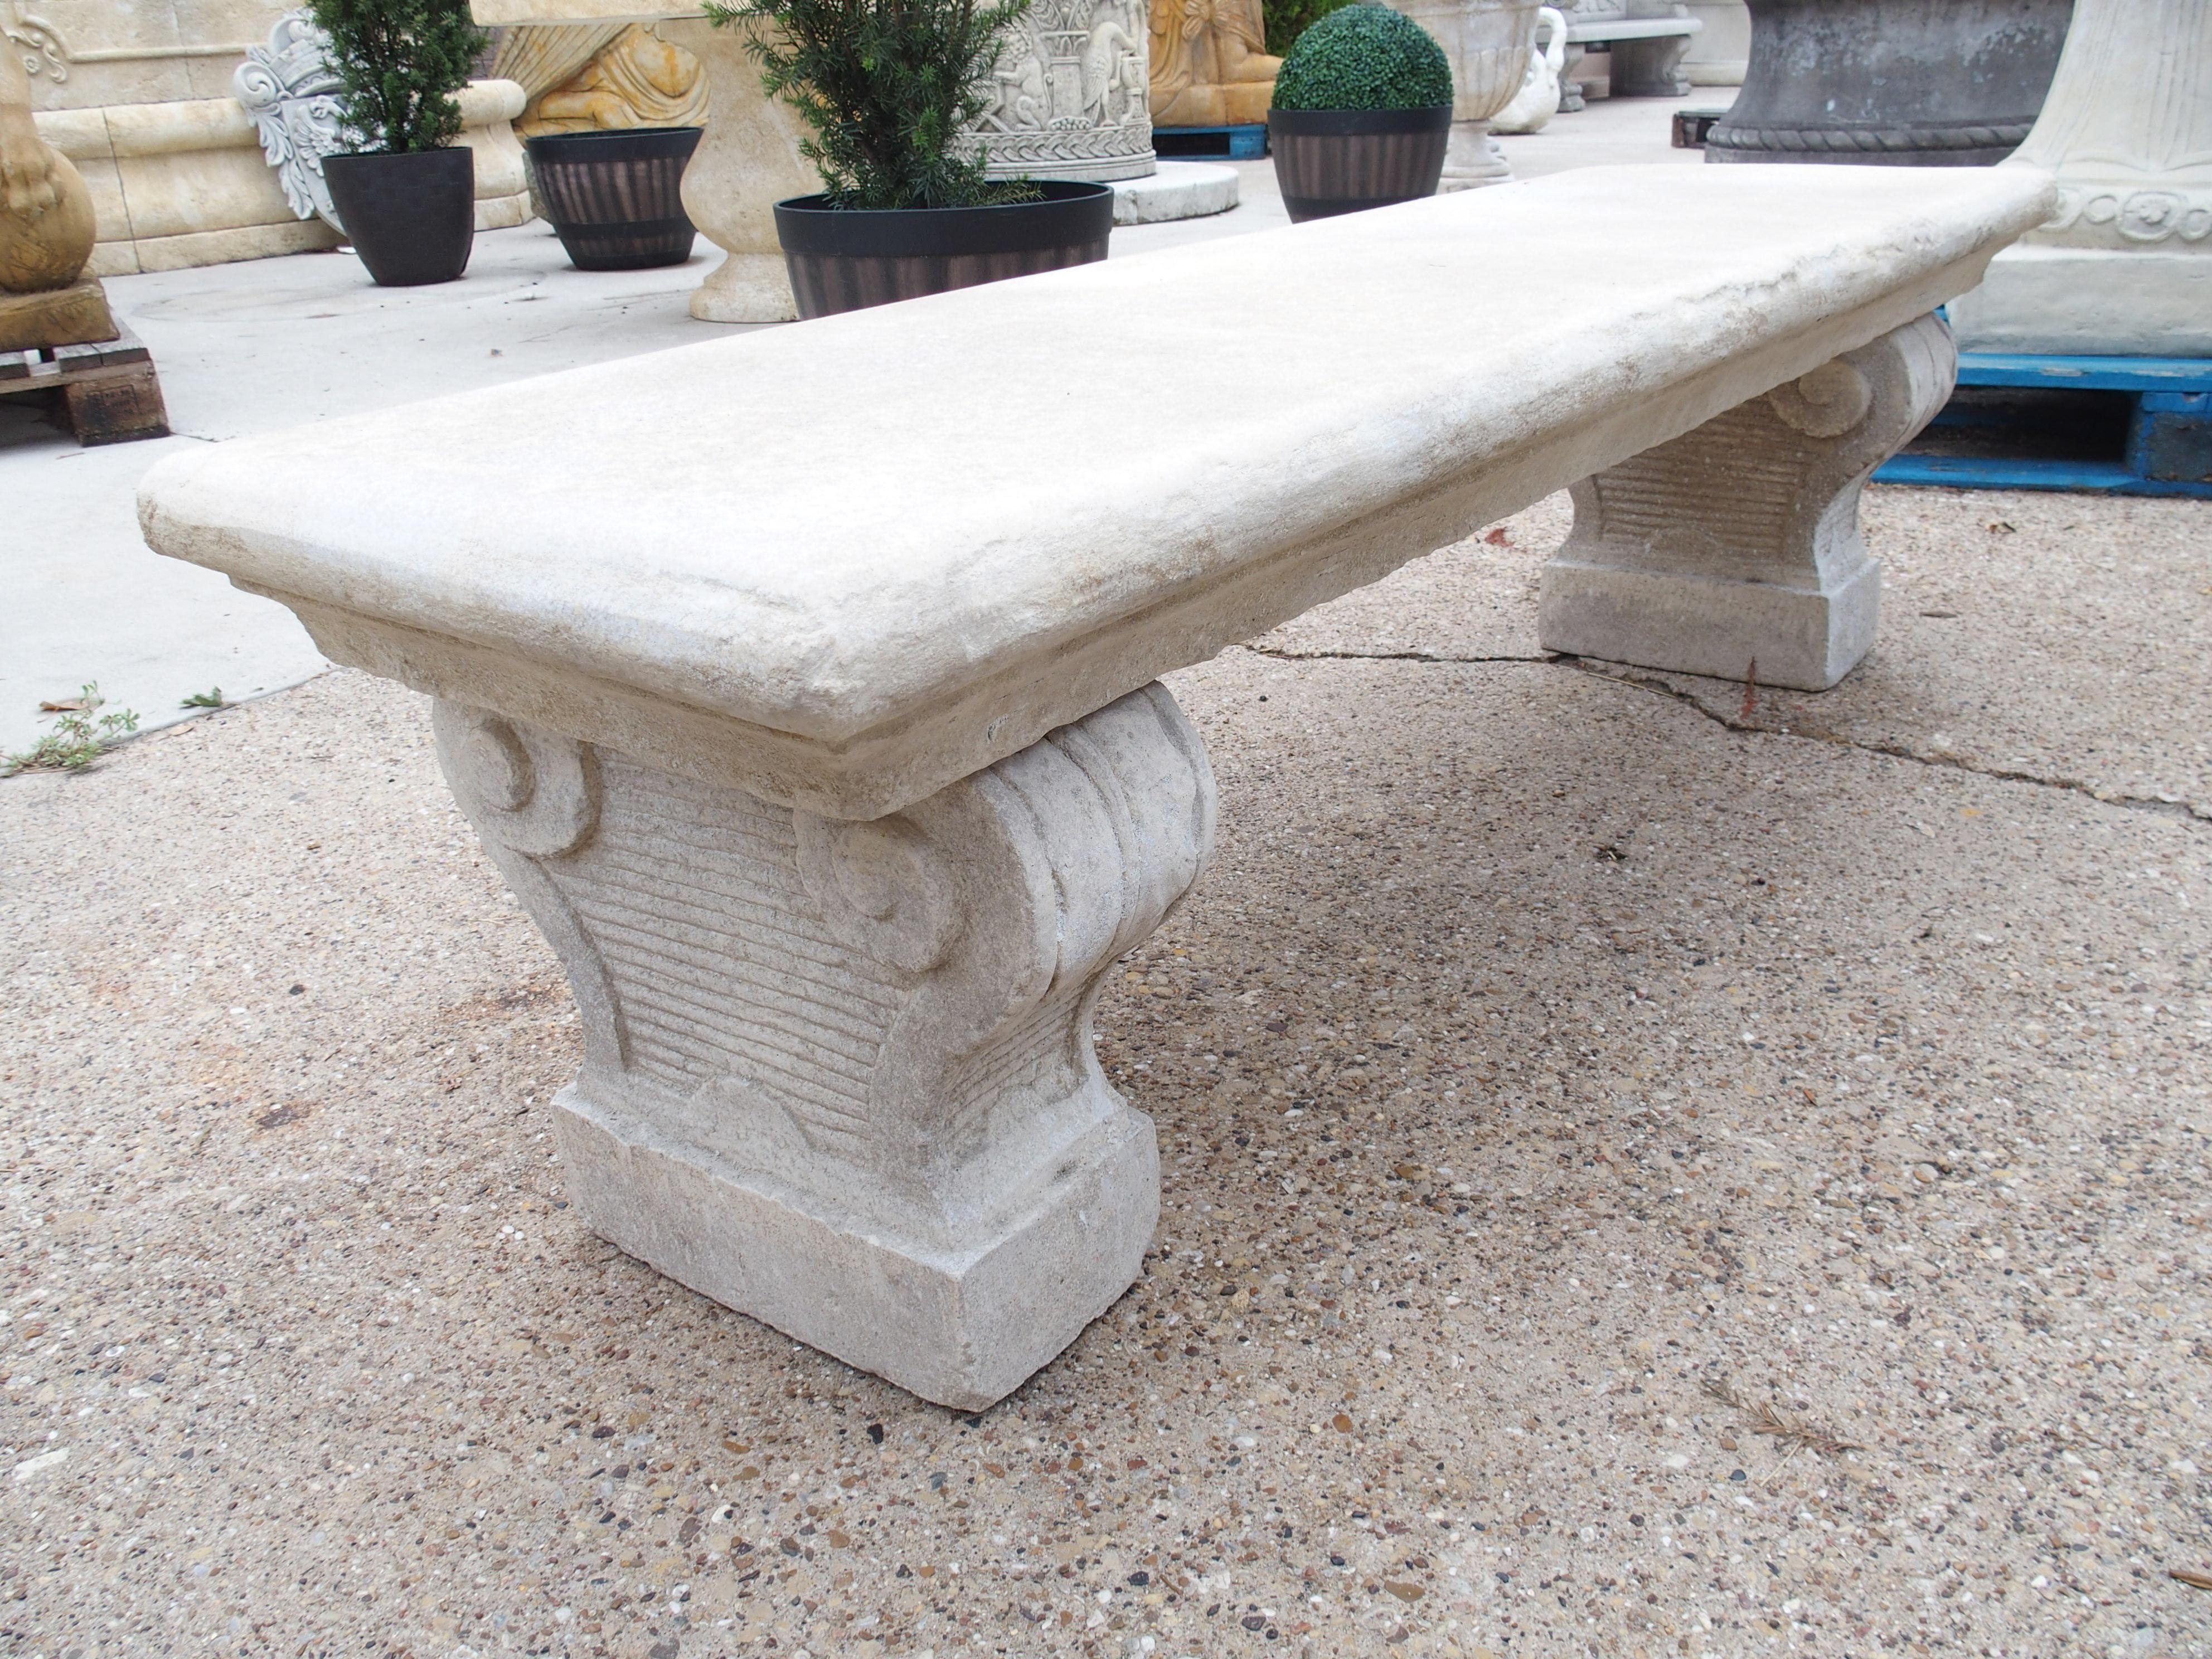 Consisting of reconstituted limestone, this garden bench was cast in Southern Italy. All three pieces of stone have a cream-colored finish with areas of white accents. The four-inch thick seat has been given a cavetto molding on all four sides,